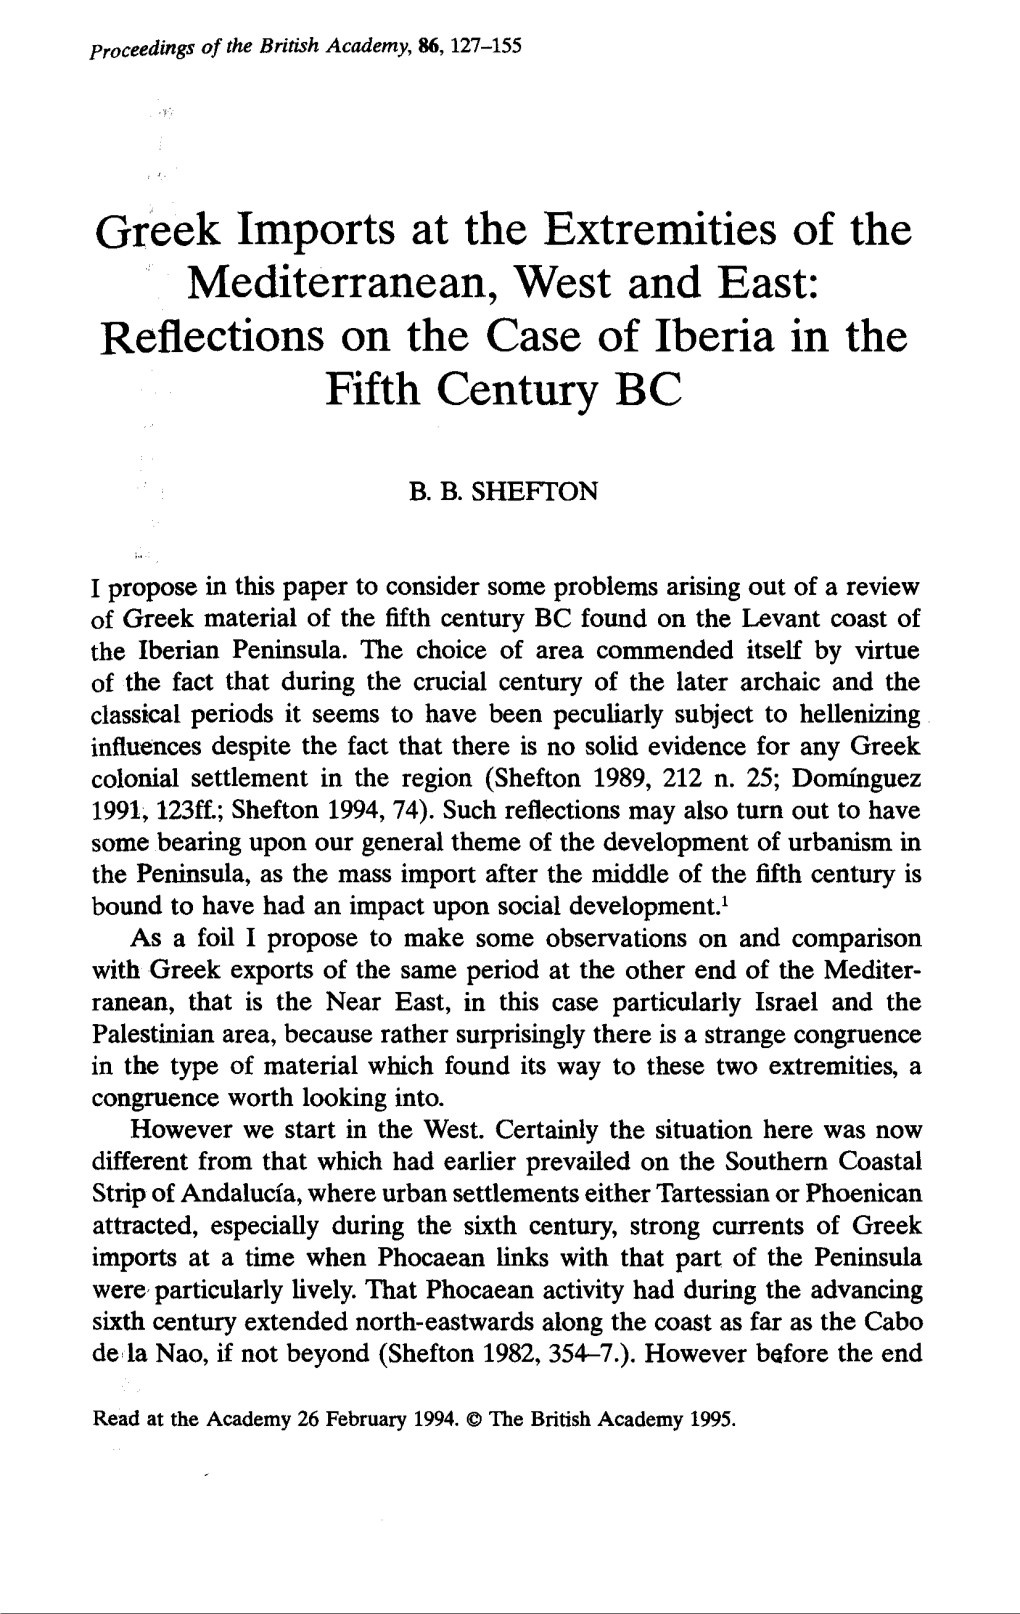 Greek Imports at the Extremities of the Mediterranean, West and East: Reflections on the Case of Iberia in the Fifth Century BC